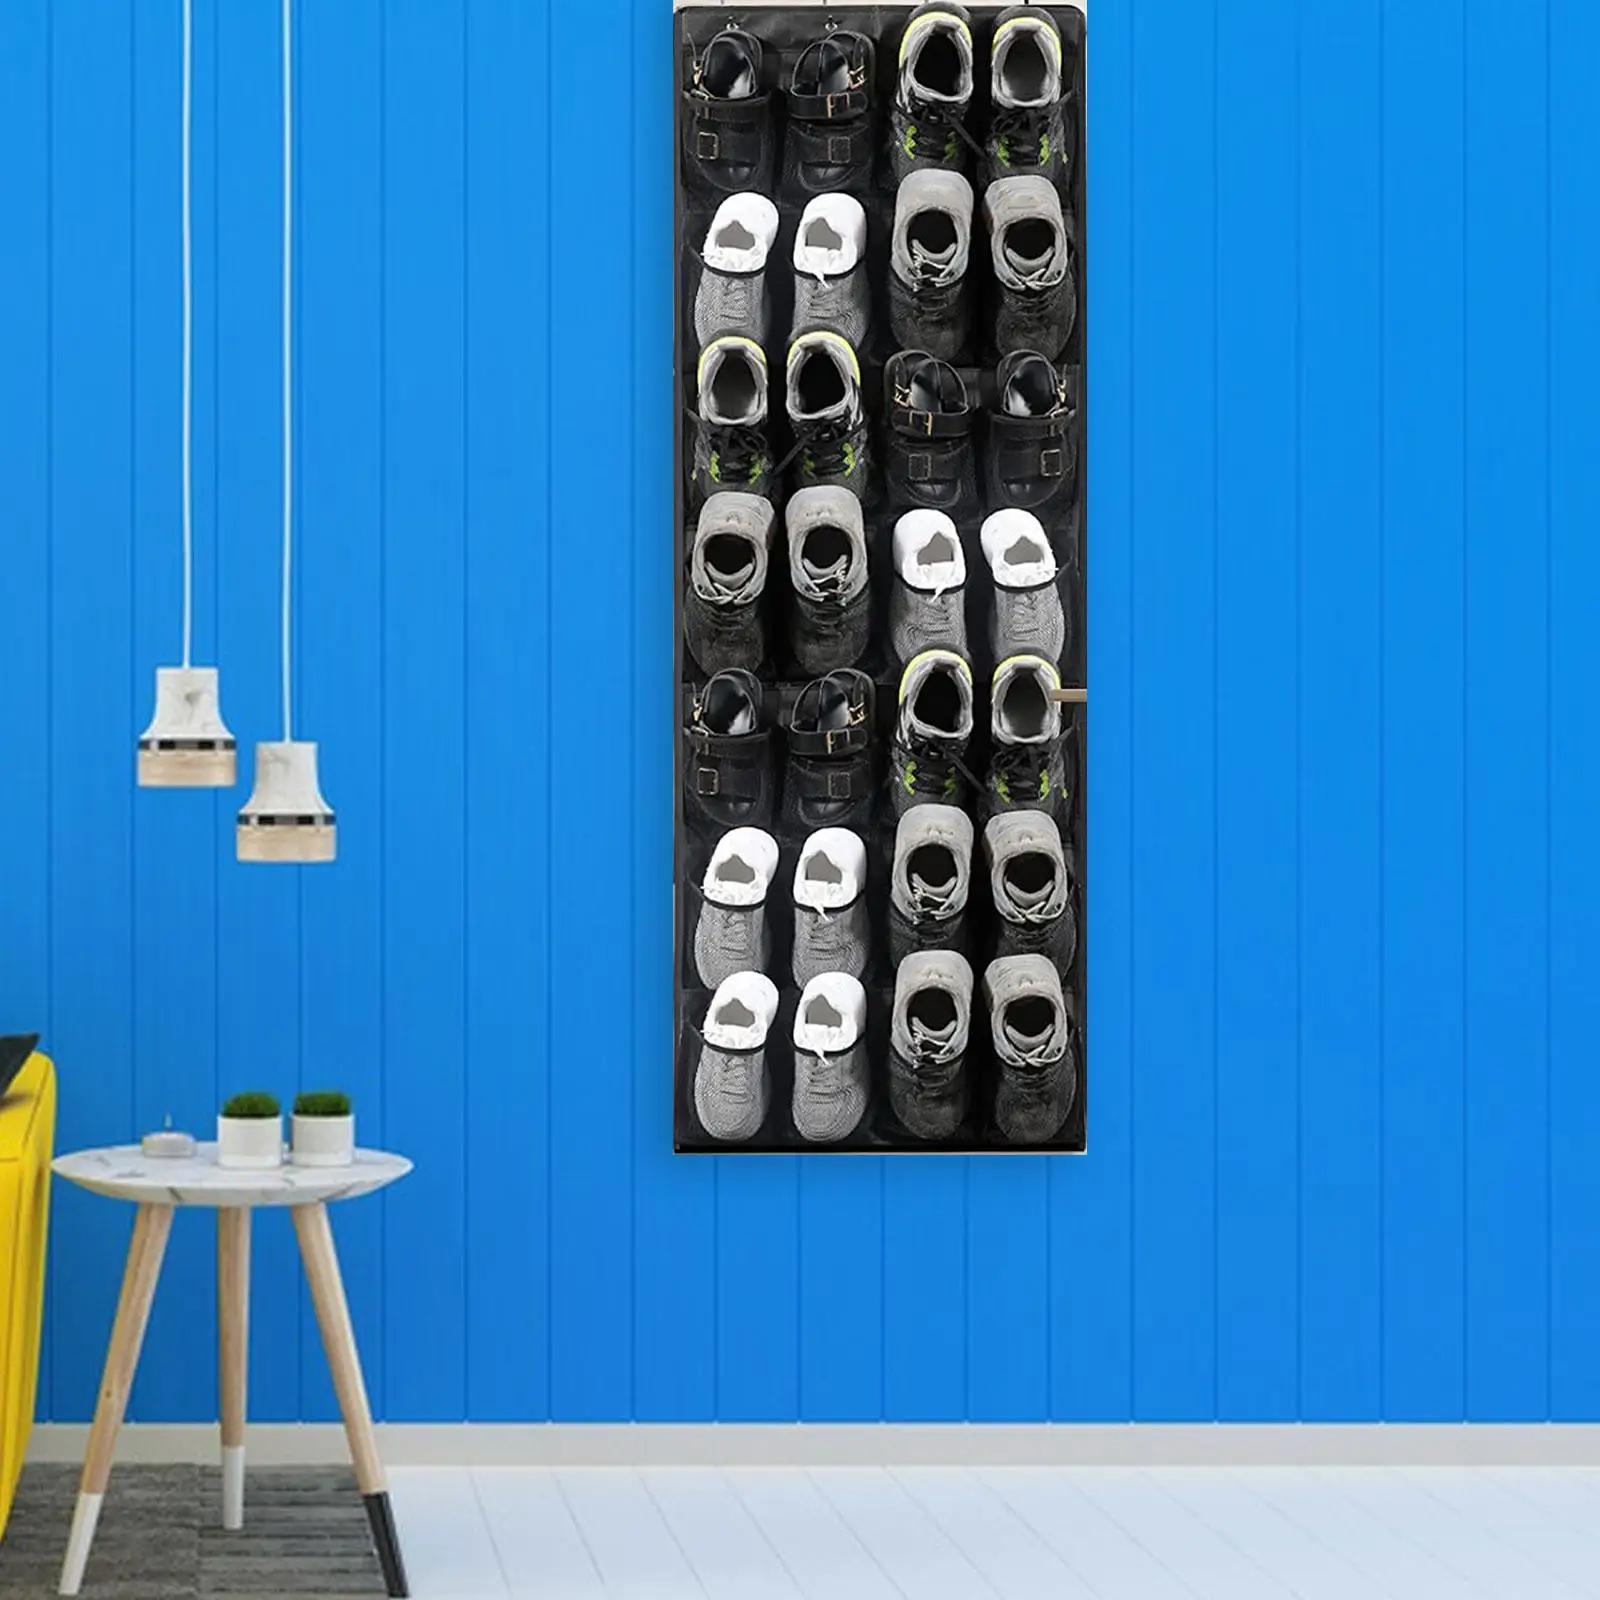 Over The Door Shoe Organizers with 28 Extra Large Fabric Pockets Hanging Shoe Organizer Shoe Rack for Bathroom Slippers Bedroom